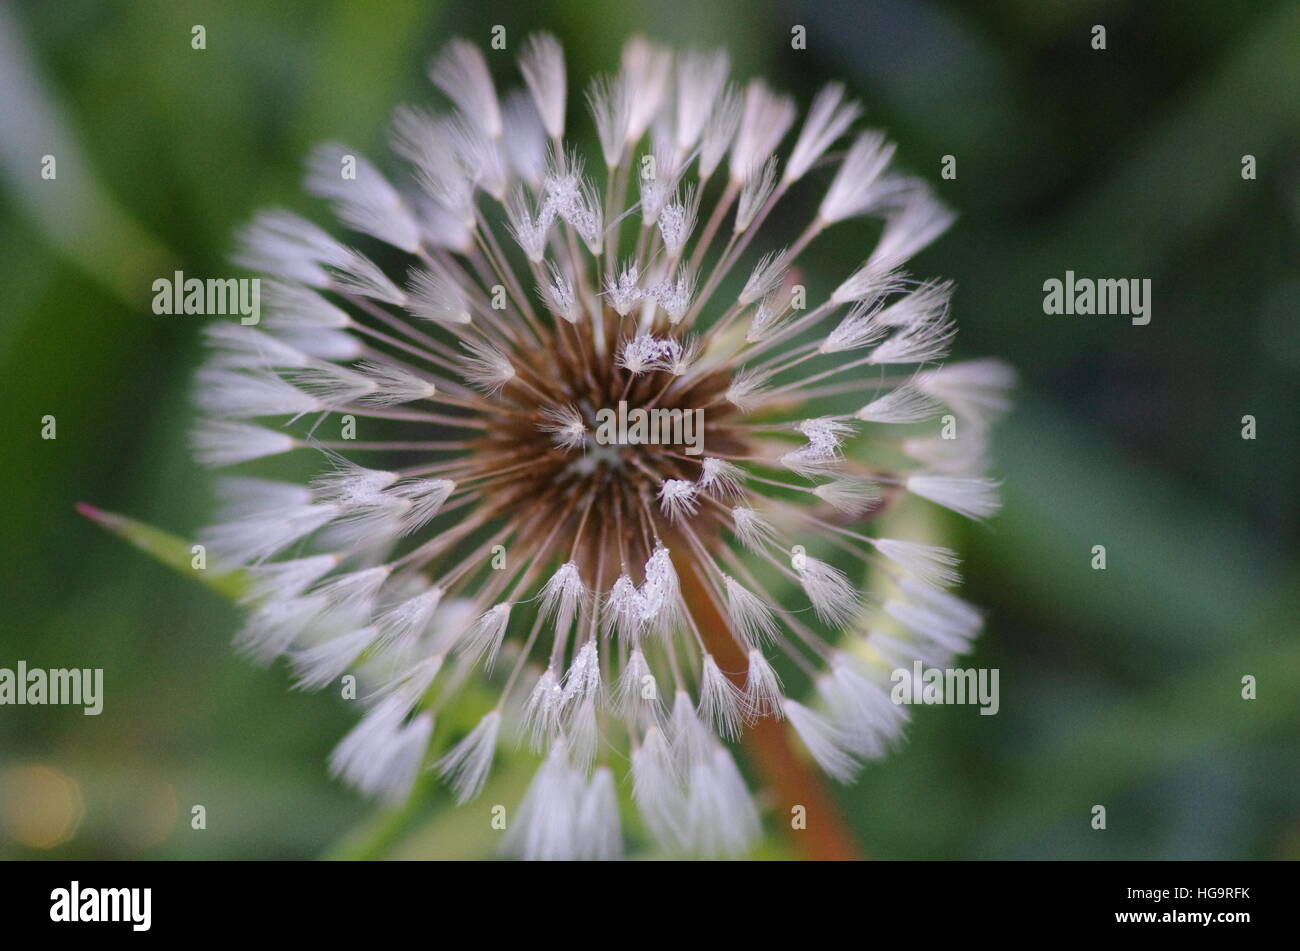 White dandelion bloom with fuzzy frosty tips. Stock Photo